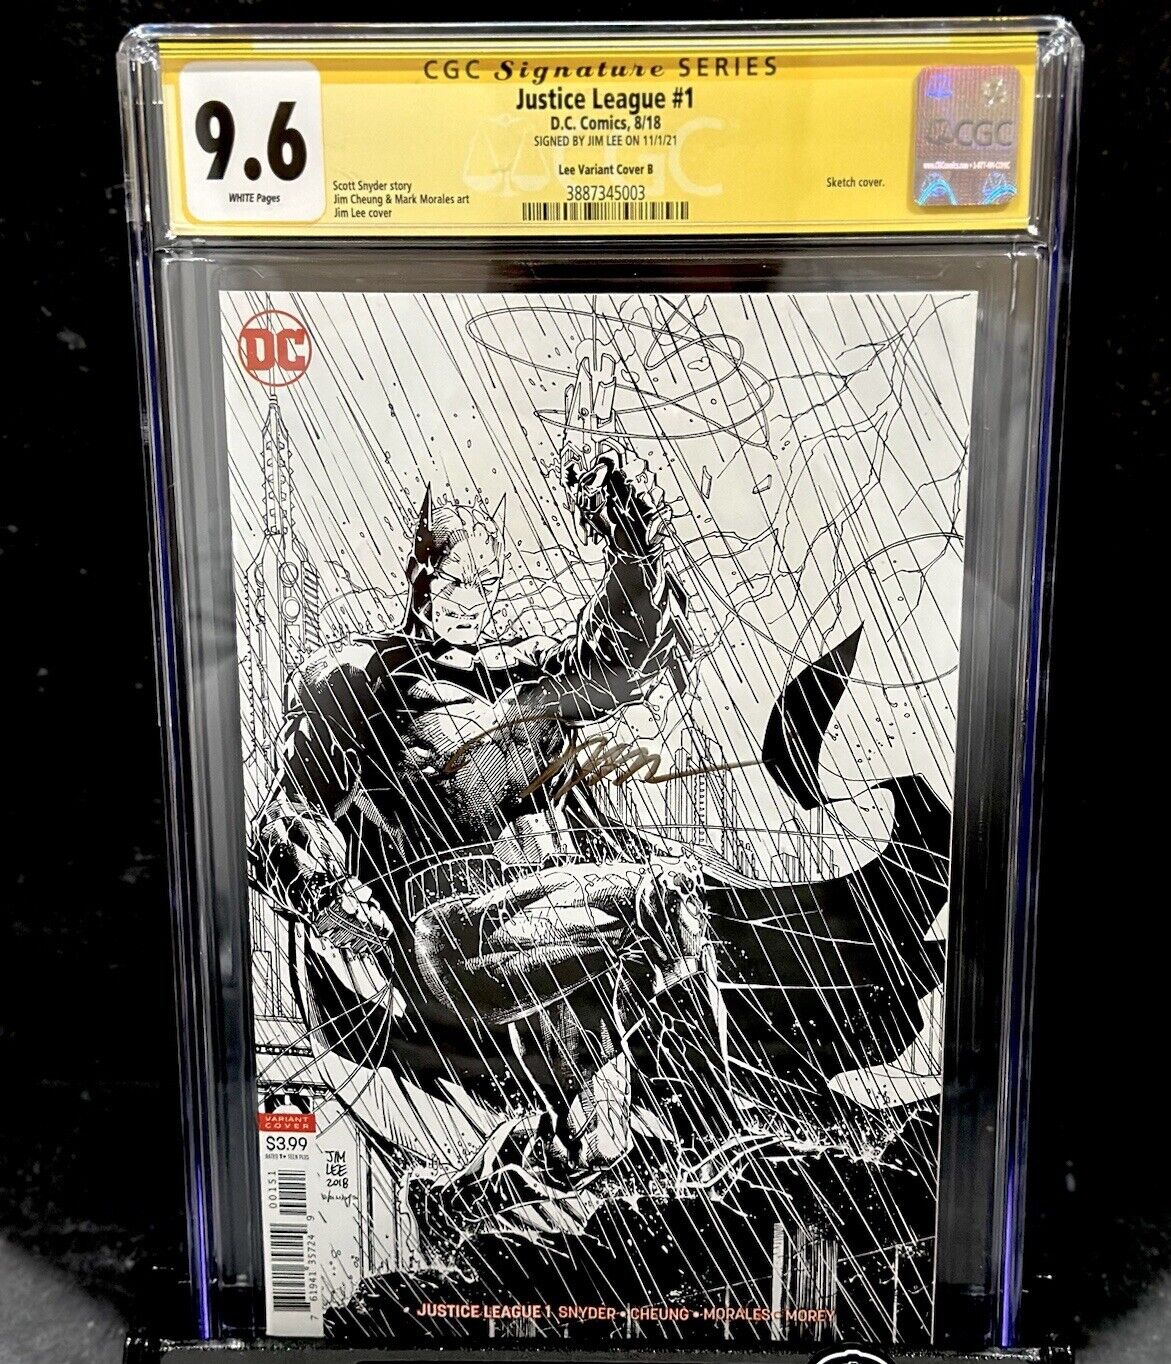 Justice League #1 Signed Jim Lee Variant B CGC 9.6